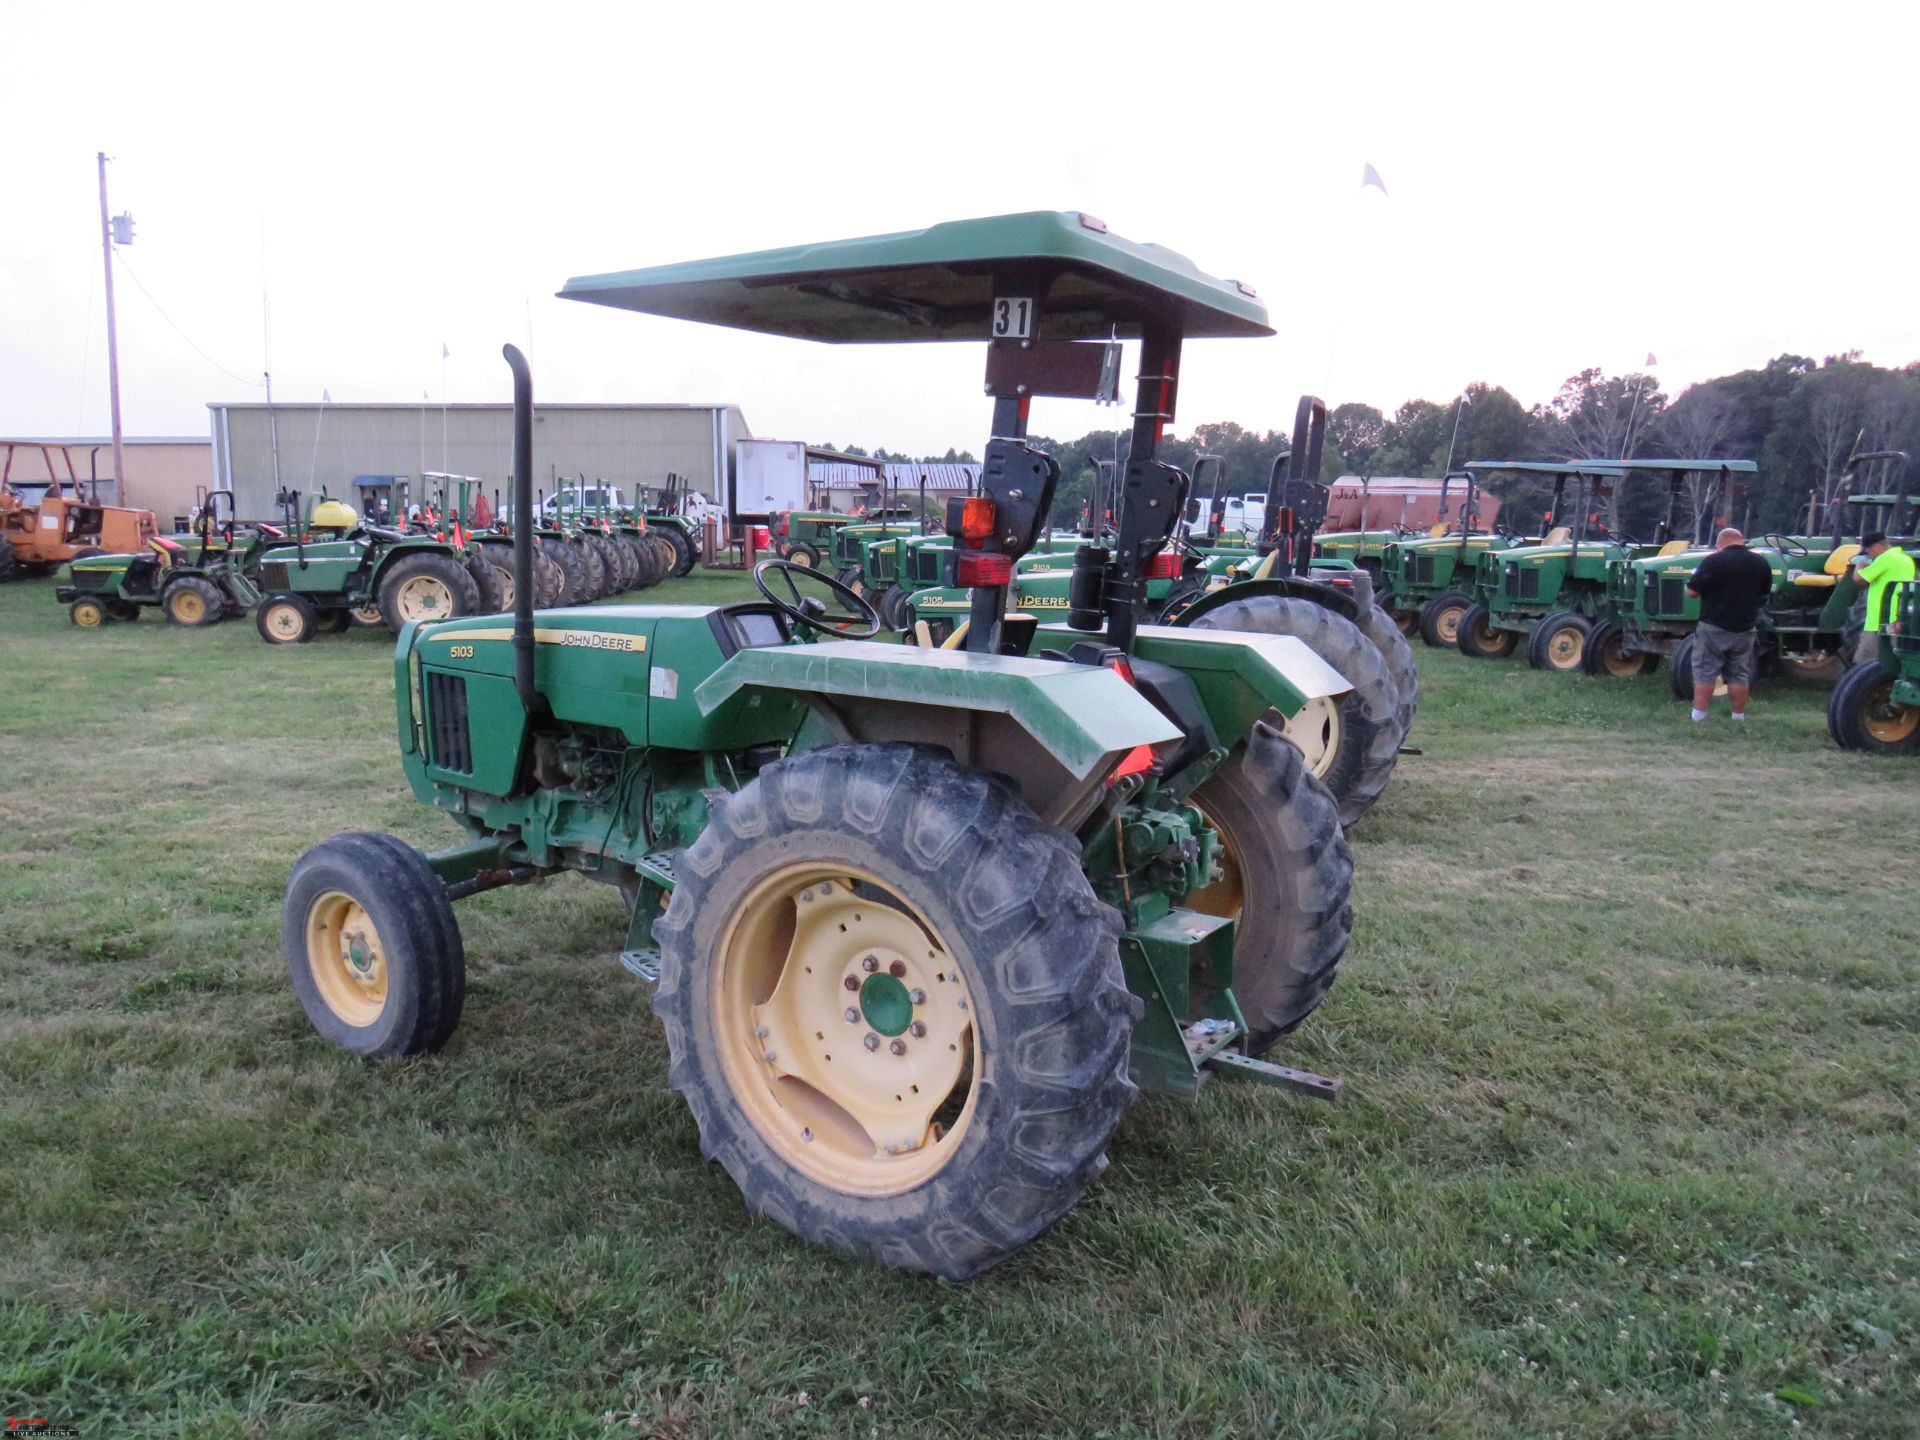 2007 JOHN DEERE 5103 TRACTOR WITH CANOPY, PTO, NO 3PT, 13.6-28 REAR TIRES, 11036 HOURS SHOWING ( - Image 4 of 8